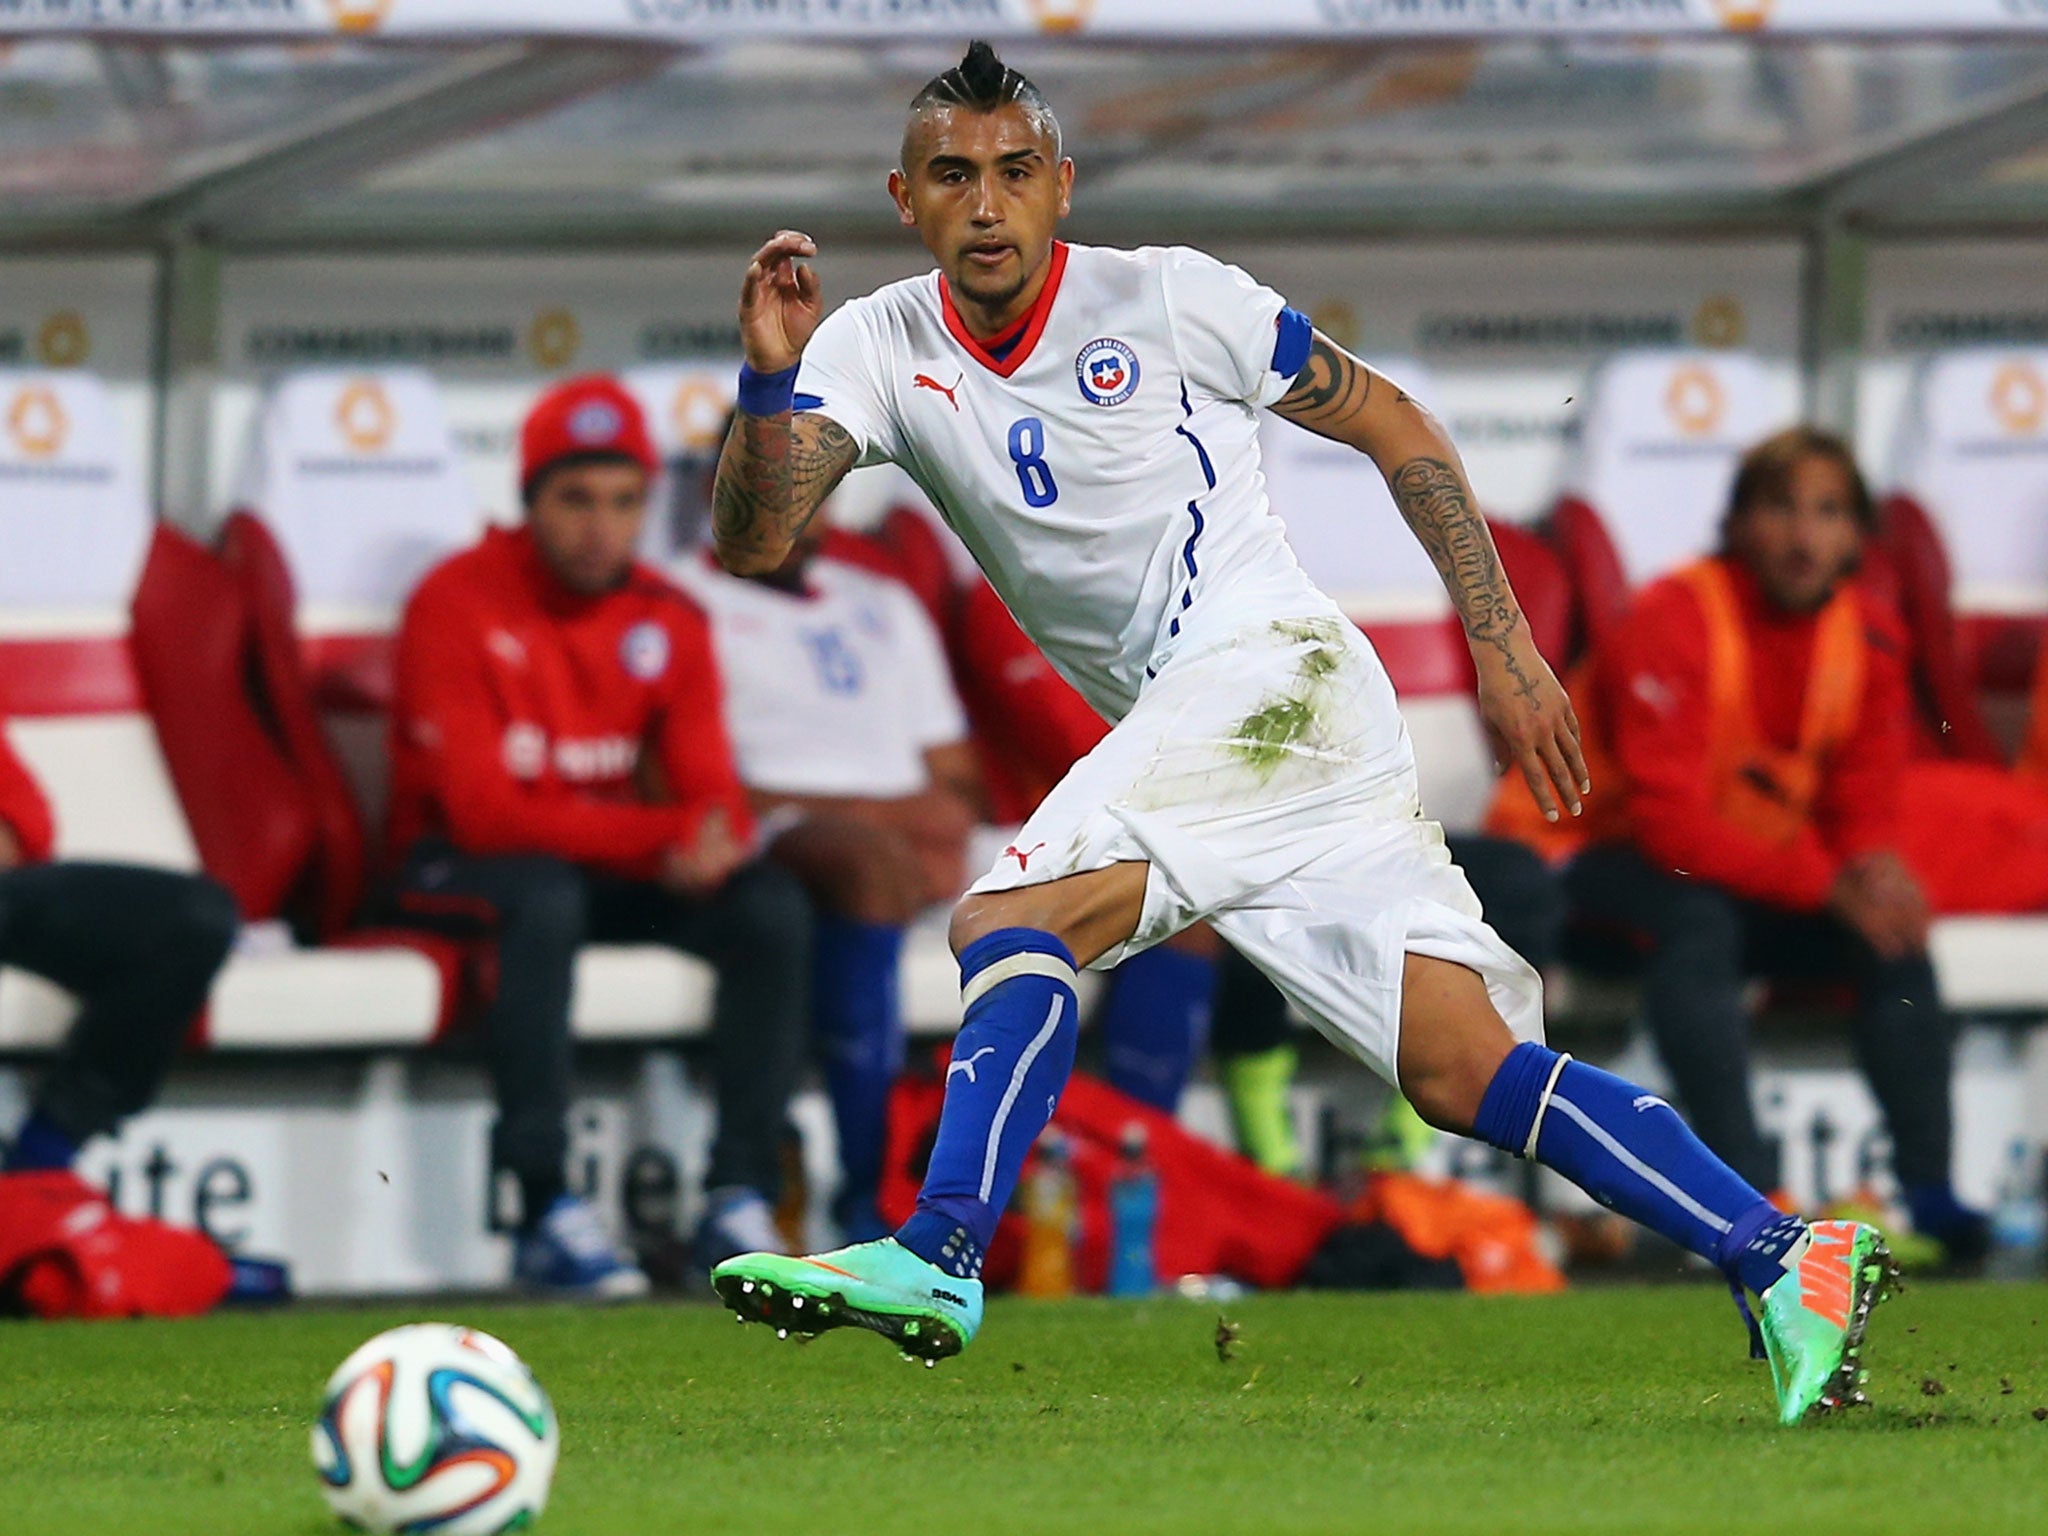 Arturo Vidal has been linked with a move to Arsenal and Manchester United